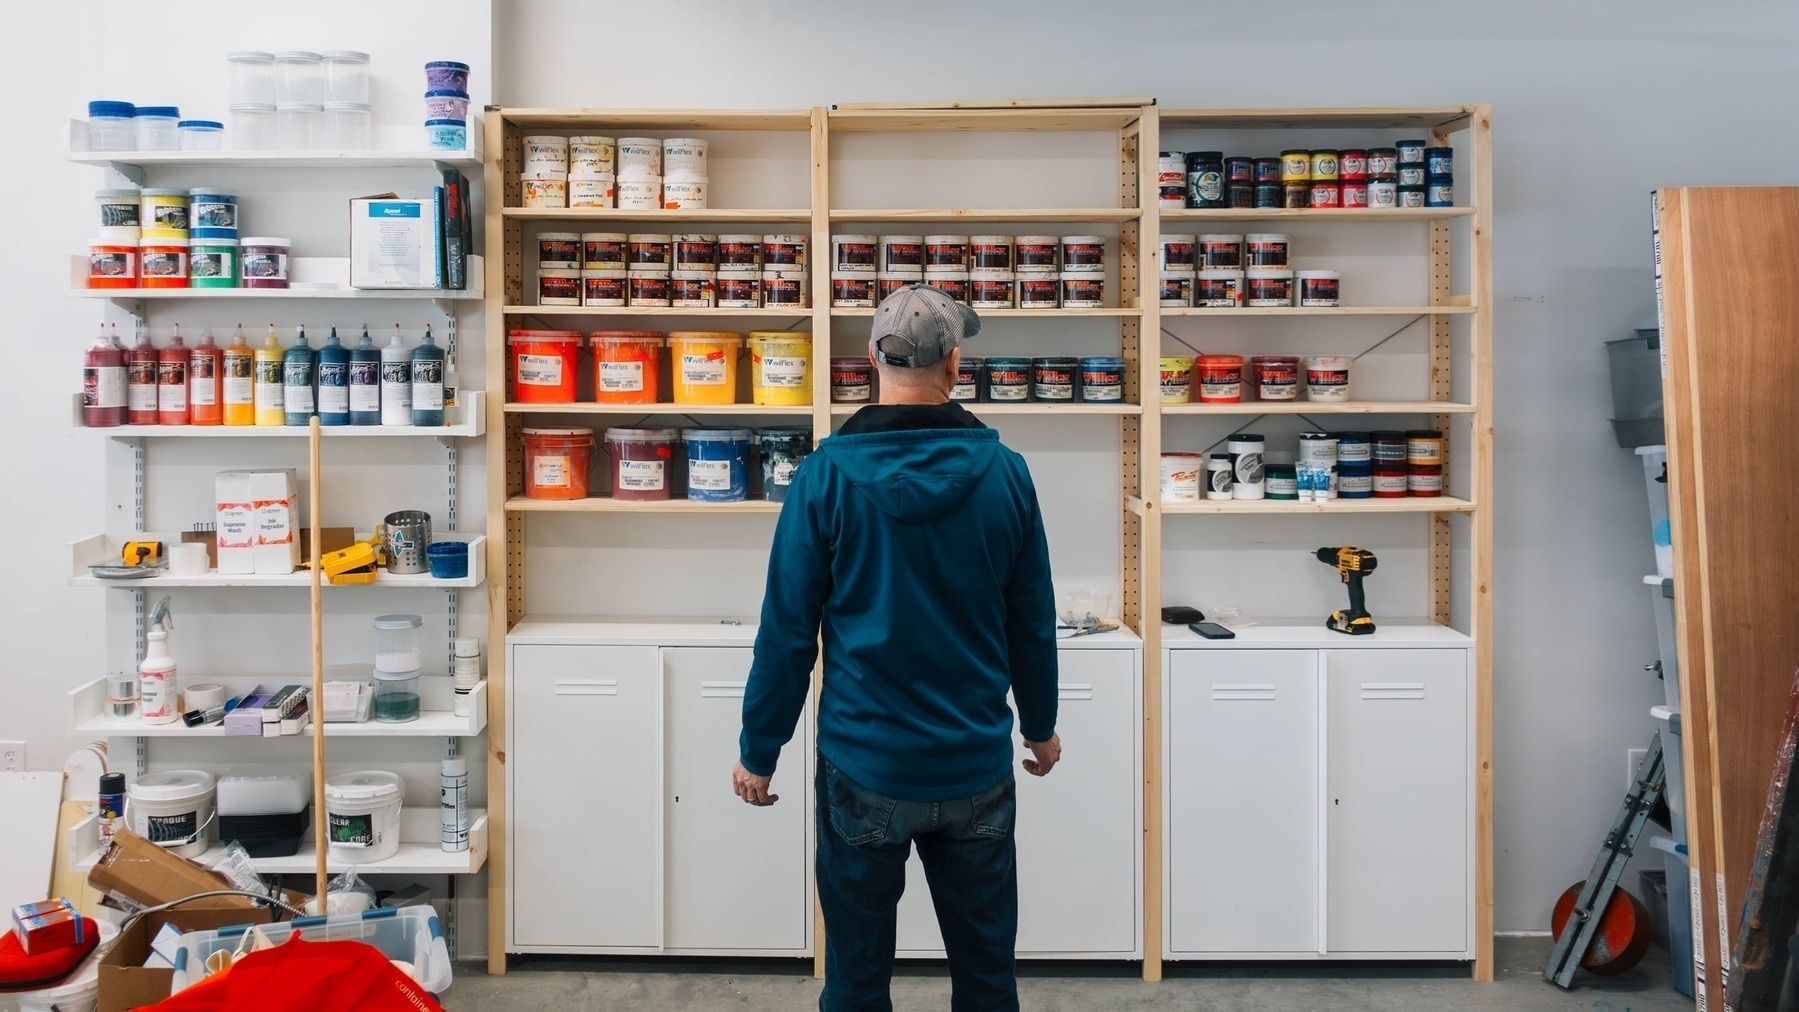 Man looks over colorful inks on wooden shelves - Sony RX100